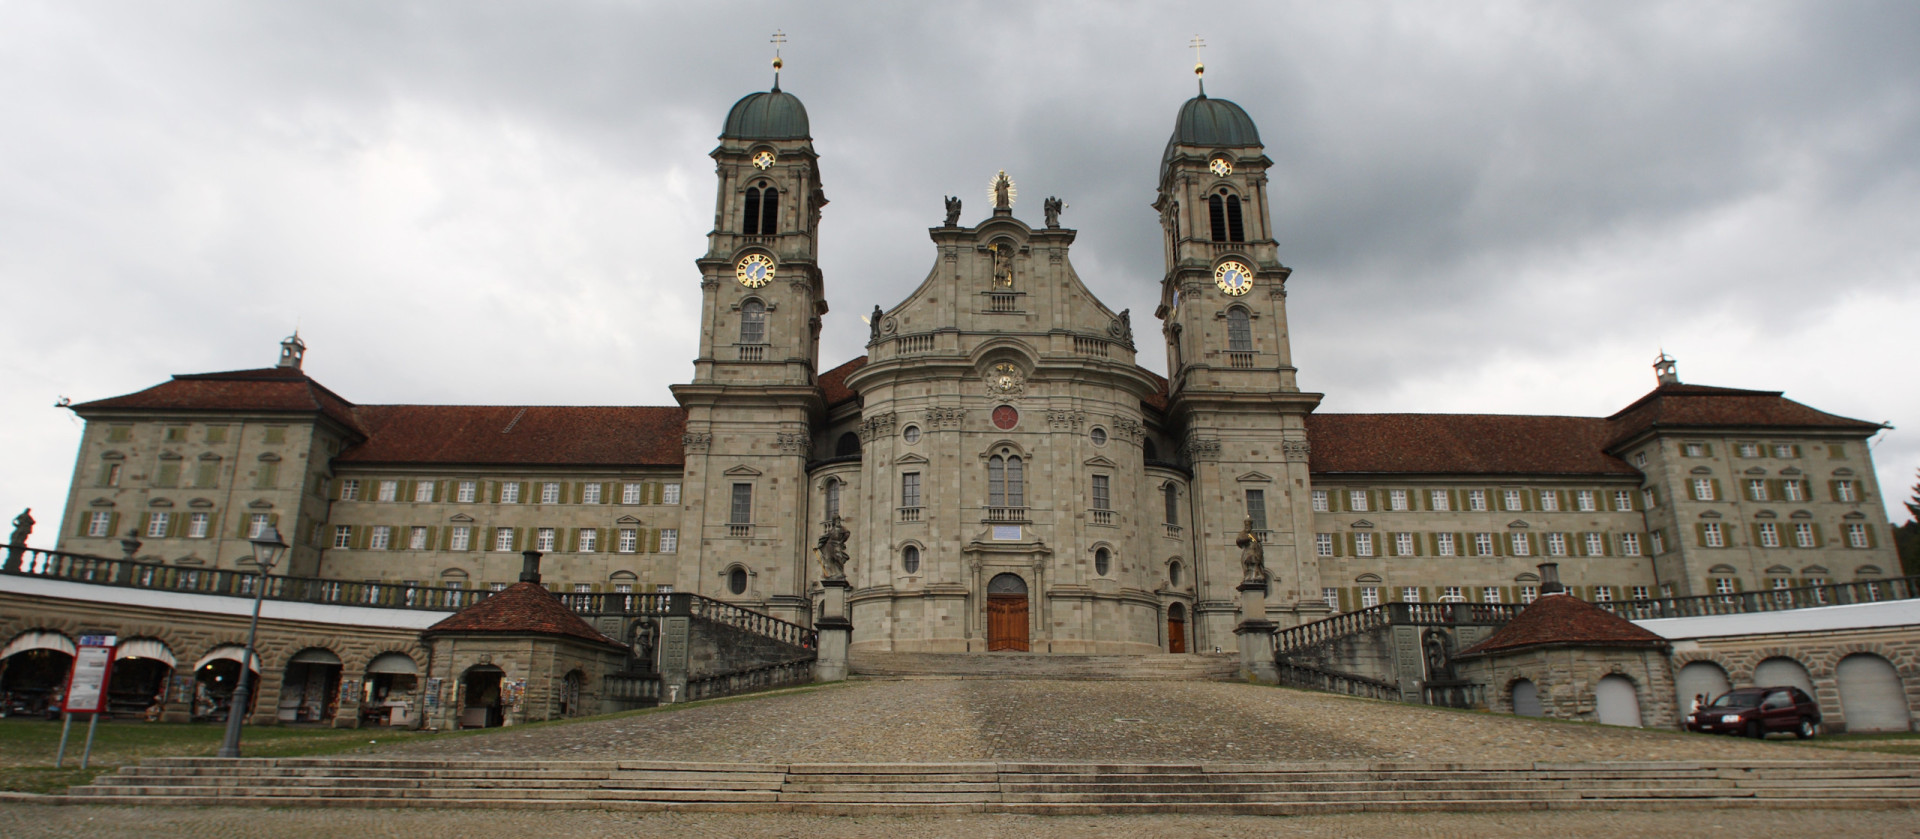 <p>Einsiedeln gained popularity thanks to its Benedictine Abbey, one of the most important pilgrimage sites in Switzerland. Close to many scenic hiking trails in the Swiss Alps, the town is located about 25 miles (40 km) from Zurich.</p><p>You may also like:<a href="https://www.starsinsider.com/n/322961?utm_source=msn.com&utm_medium=display&utm_campaign=referral_description&utm_content=524487en-us"> Understanding the \"Kate Middleton effect\</a></p>